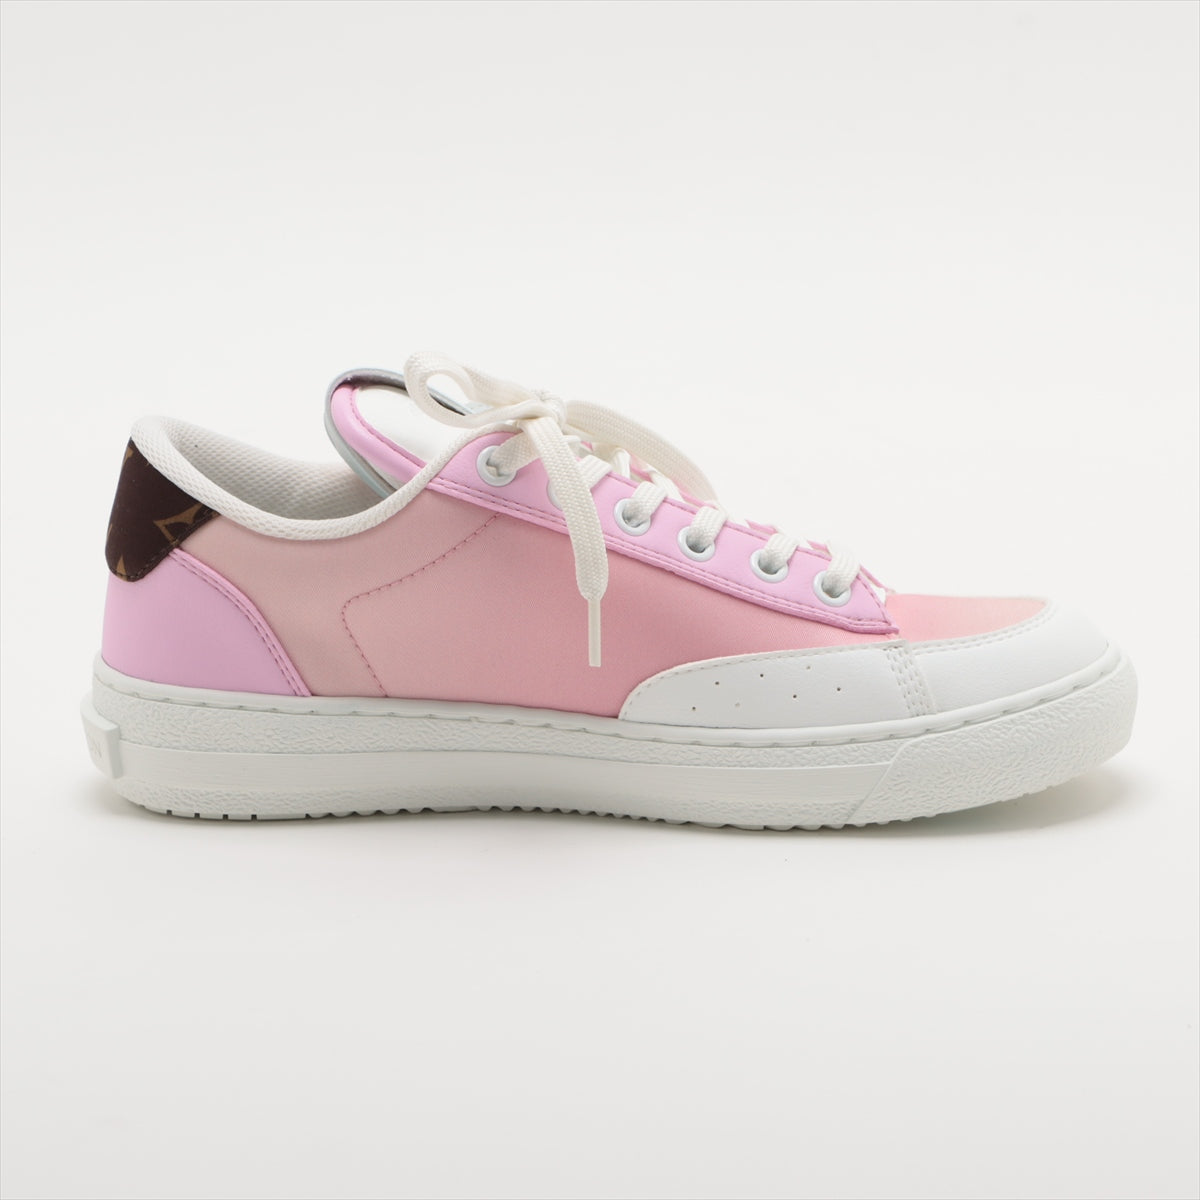 Louis Vuitton Charlie Line 22 years Leather x fabric Sneakers EU36 Ladies' White x pink LD0232 Monogram Is there a replacement string box There is a bag